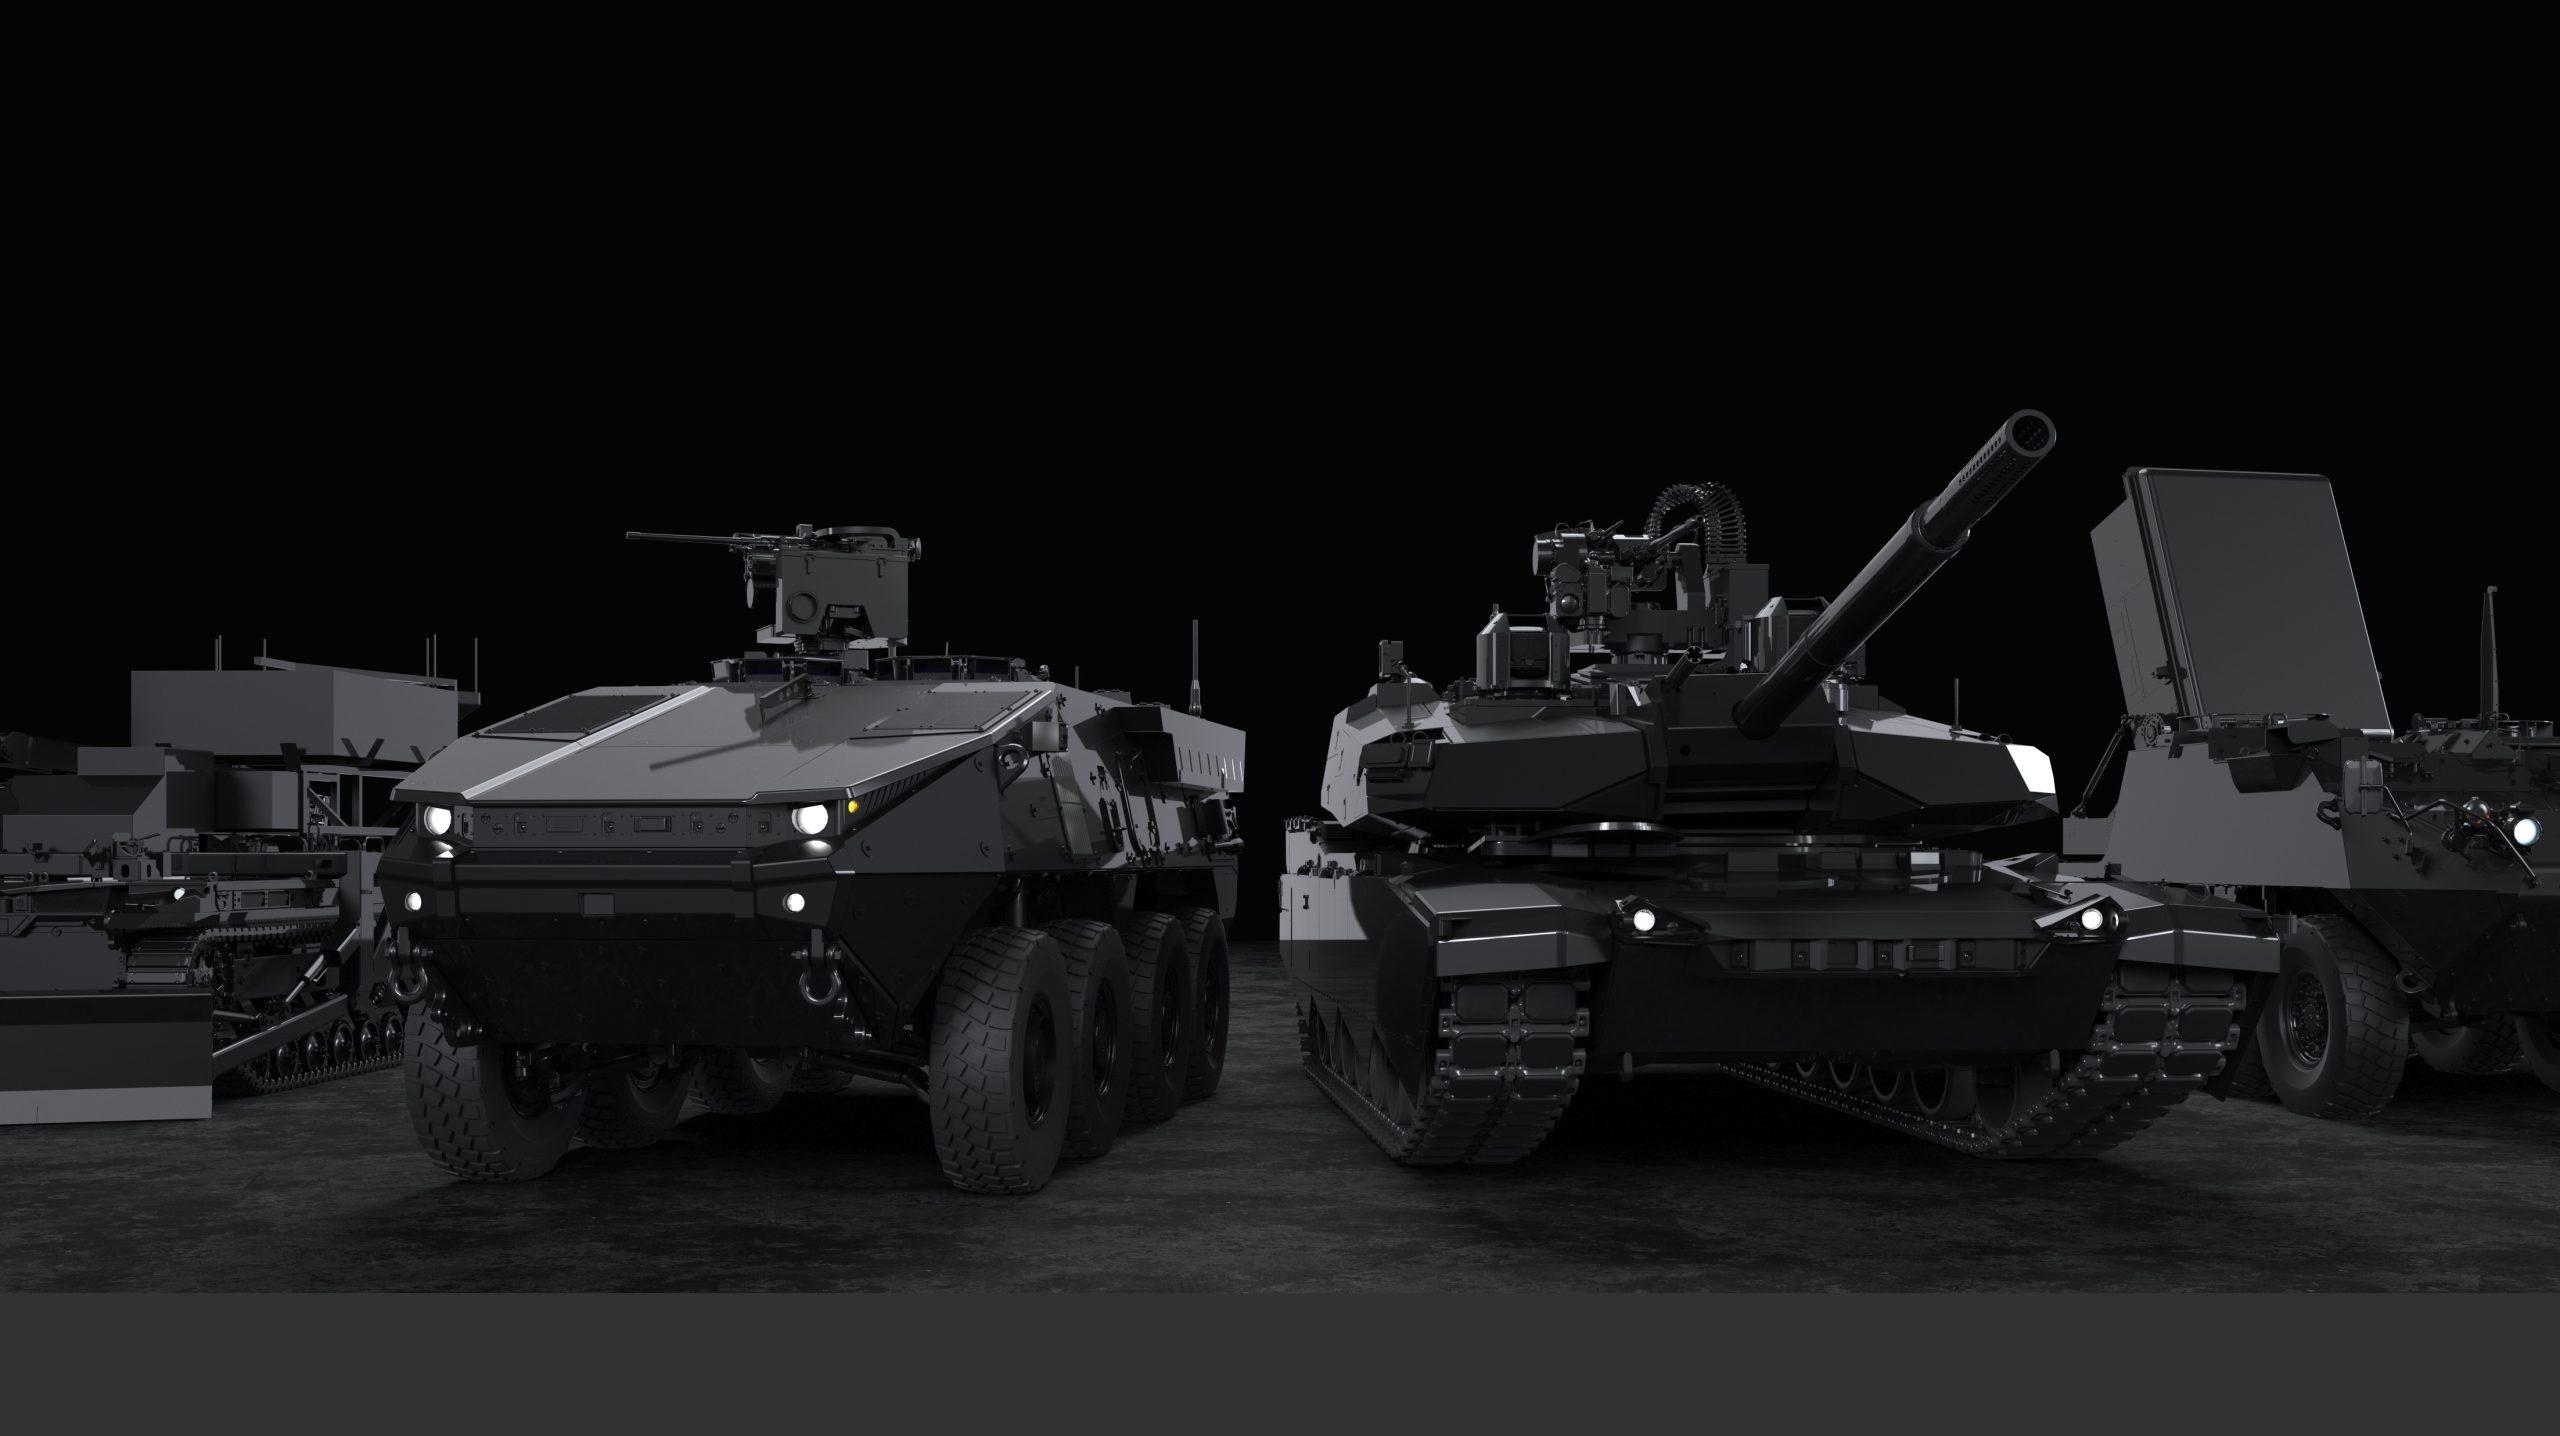 General Dynamics Land Systems to Participate in US Army’s Annual Meeting & Exposition 2022